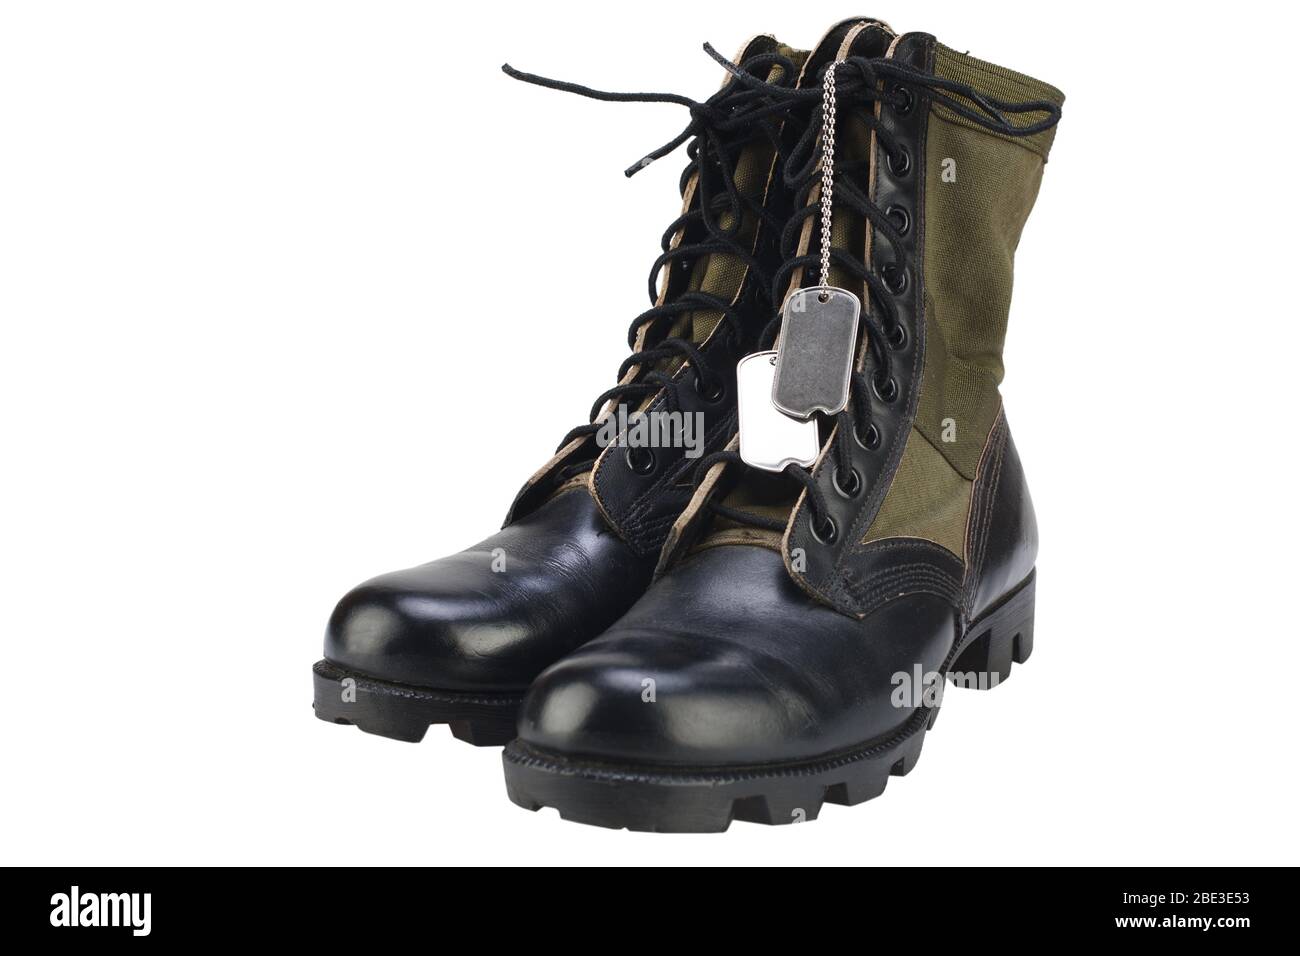 New brand US army pattern jungle boots with dog tags isolated on white background Stock Photo